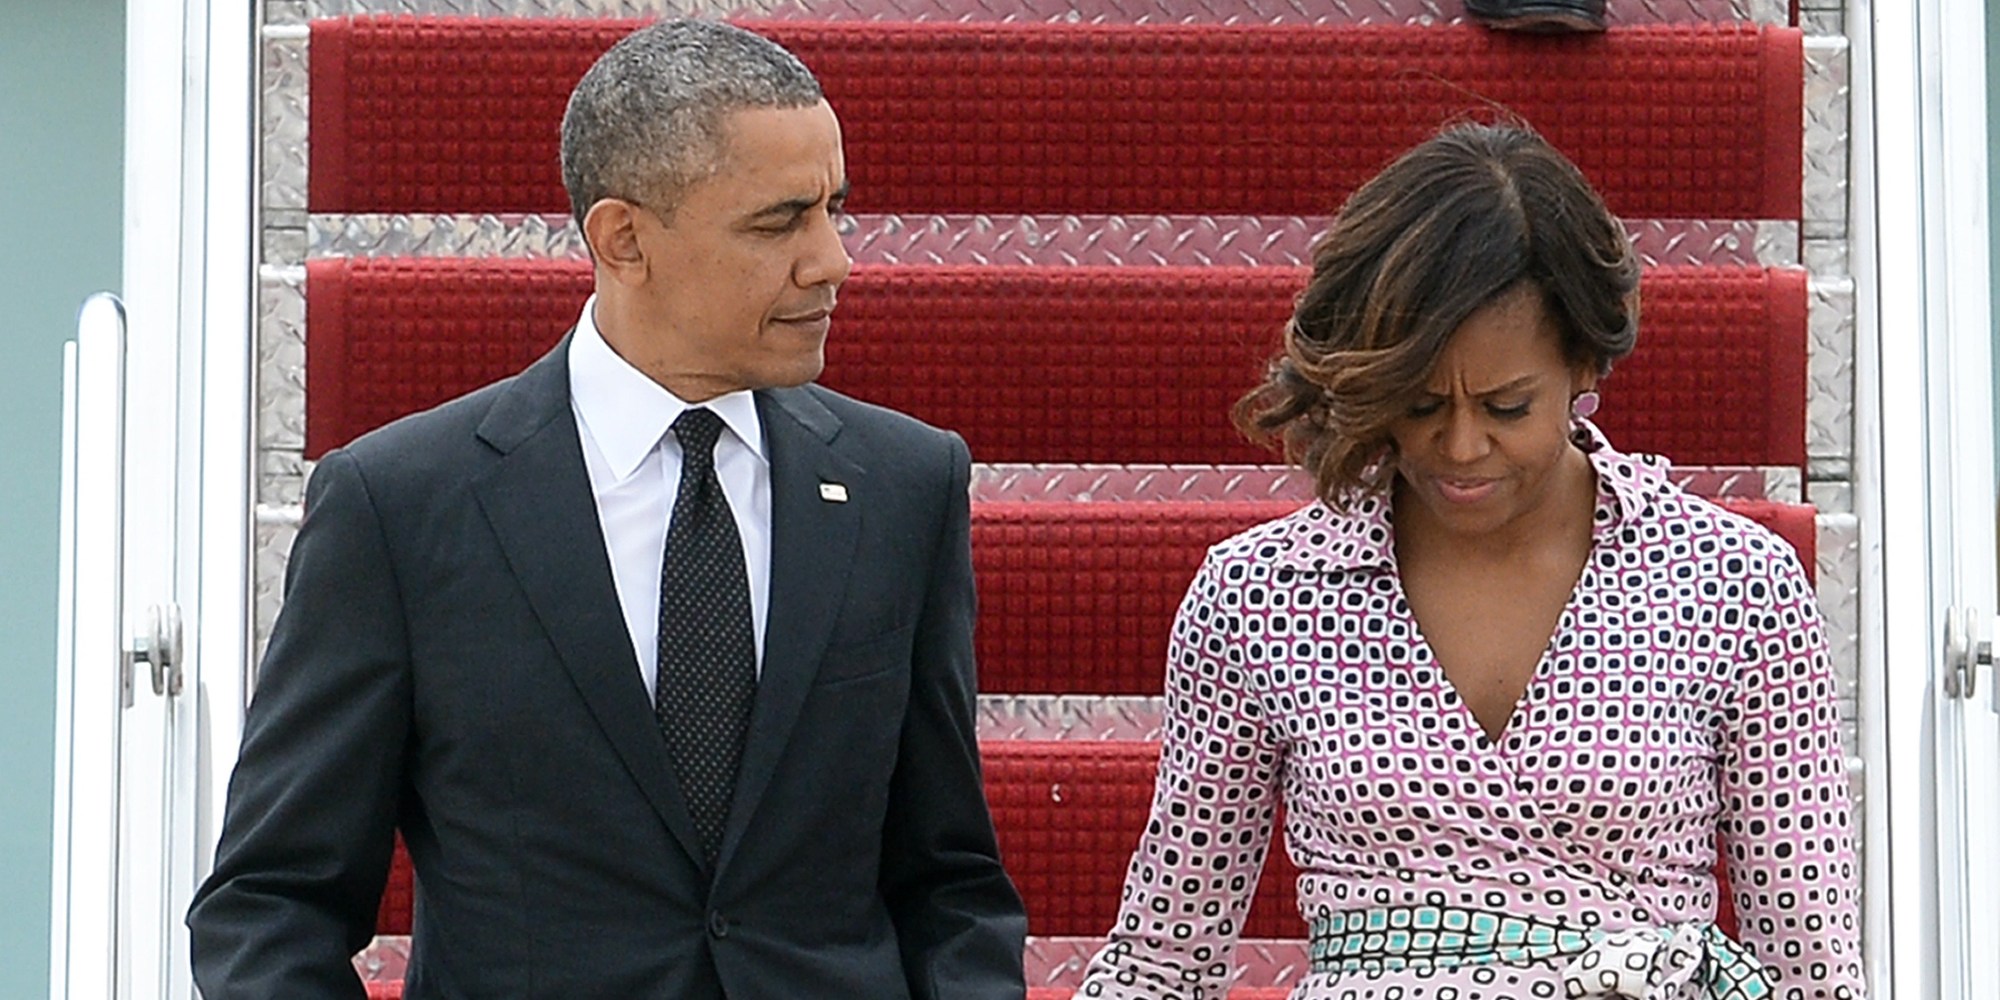 Michelle Obama Looks Really Sad Over Her Short New York Trip | HuffPost2000 x 1000